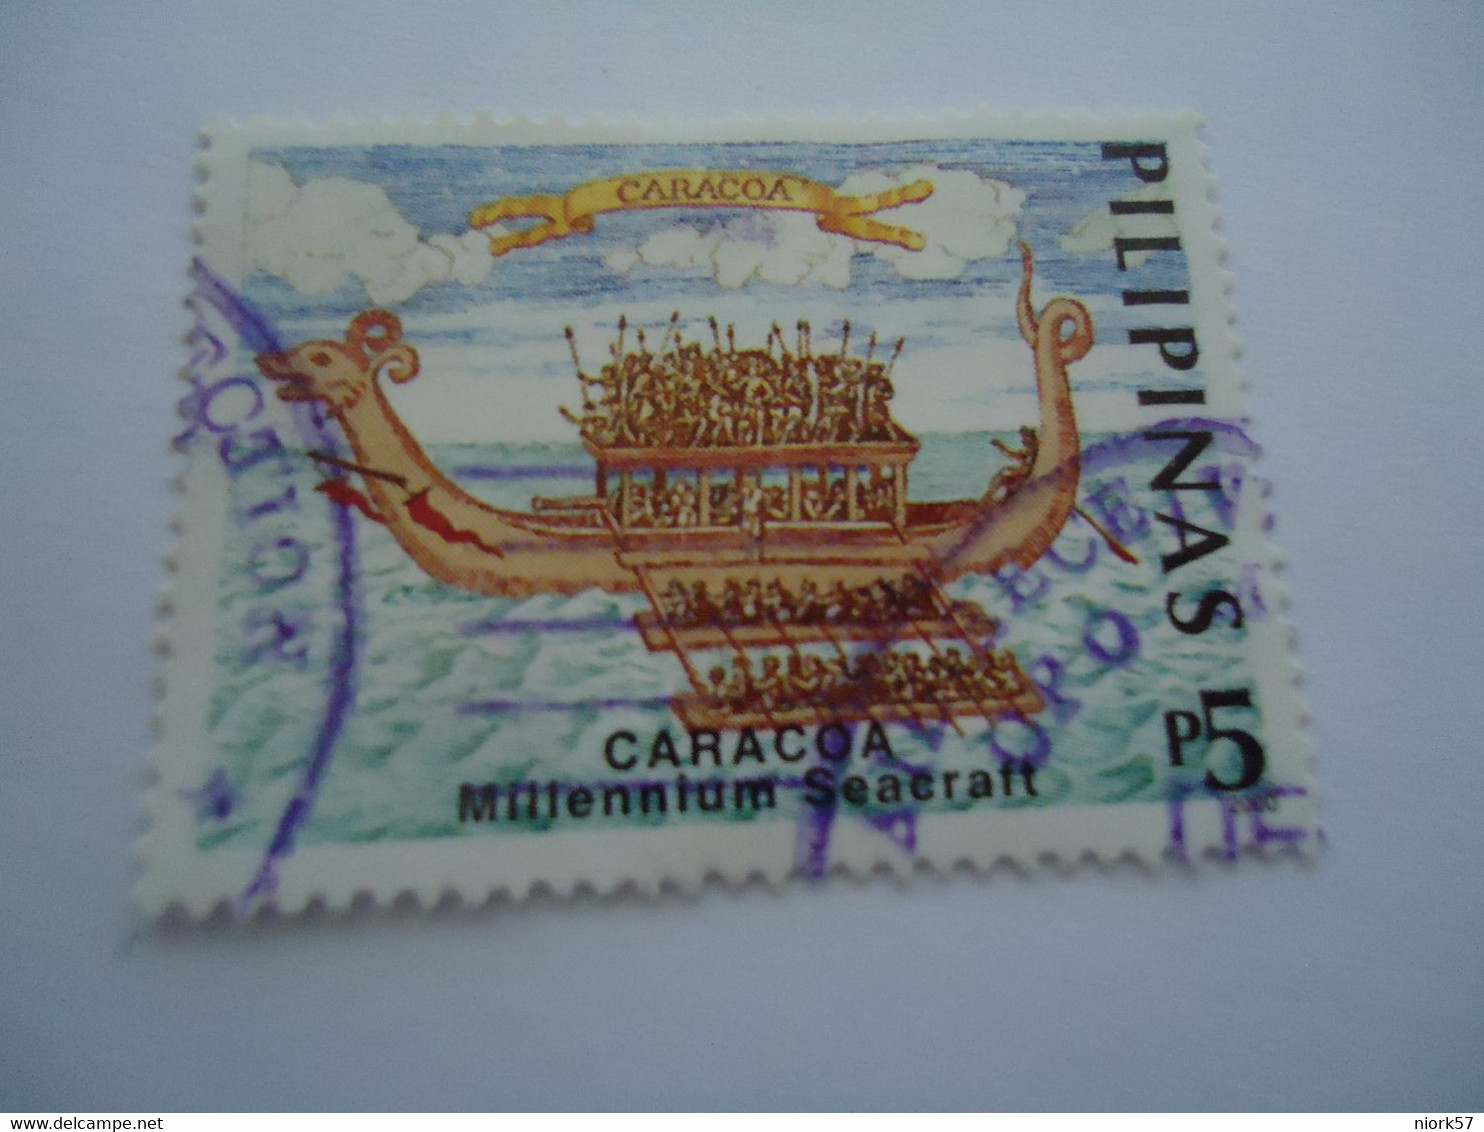 PHILIPPINES USED   STAMPS   BOATS   SHIPS - Philippinen